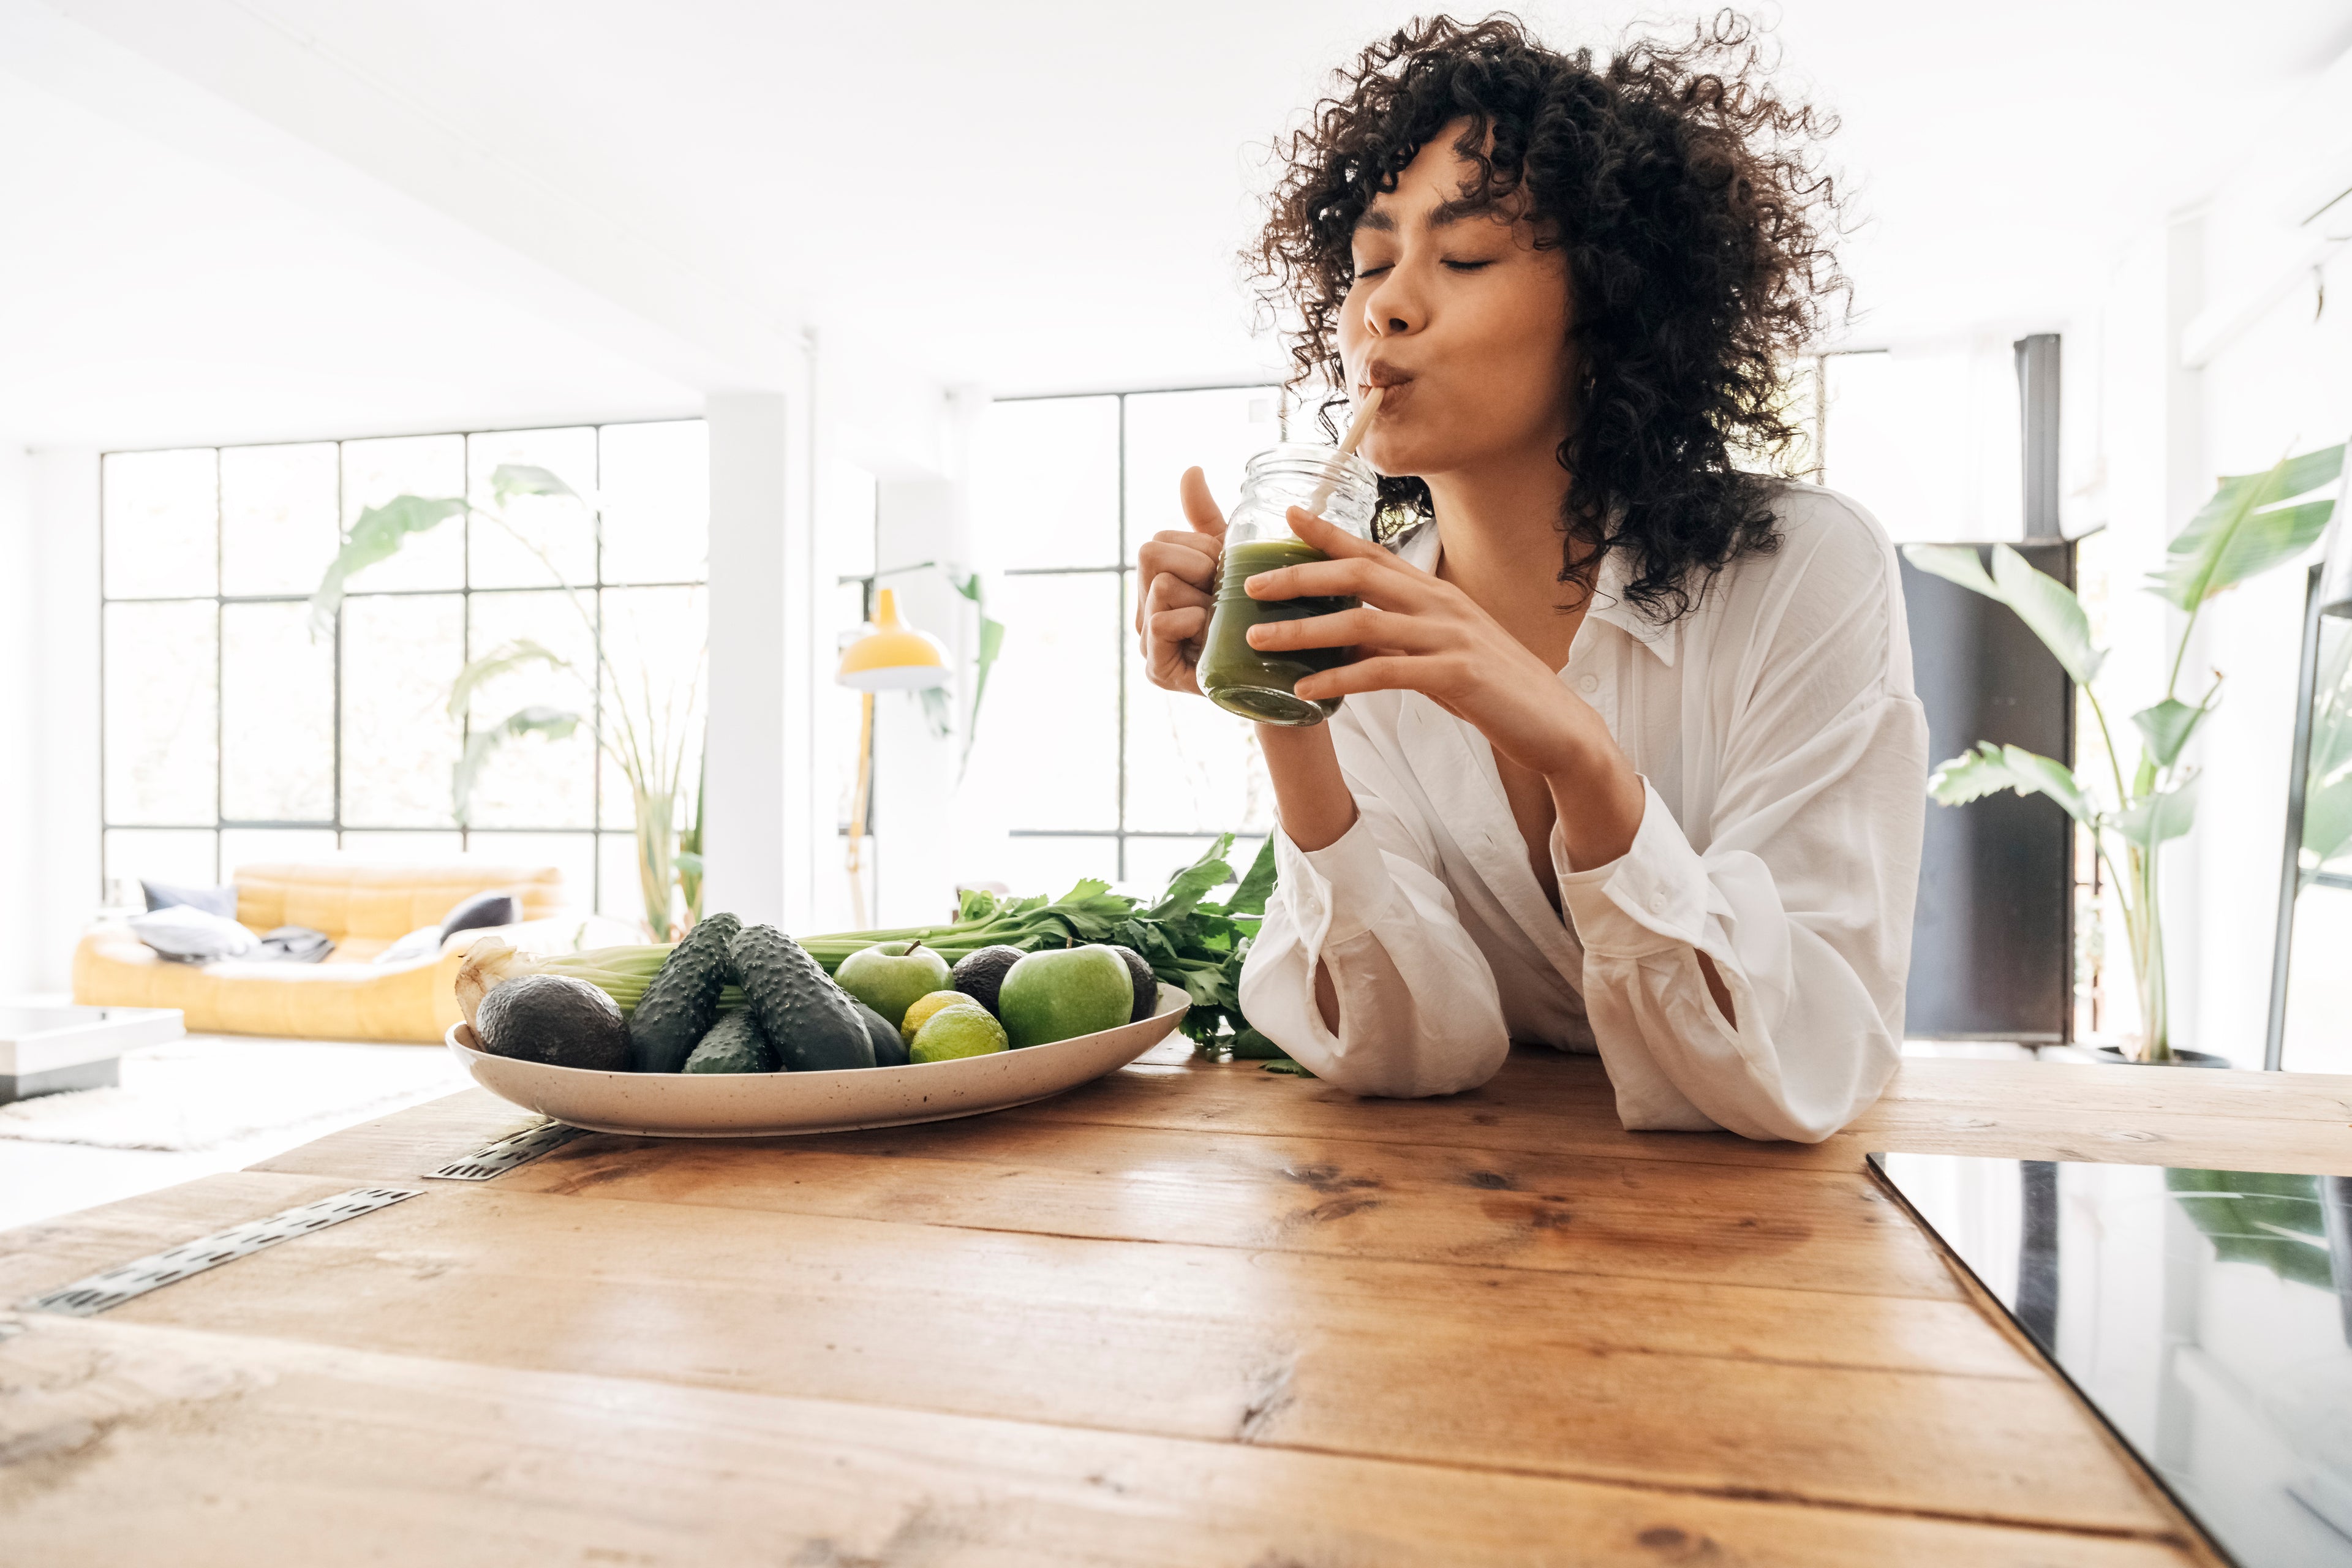 young lady with dark curly hair drinking green smoothie with fruit and vegetables next to her